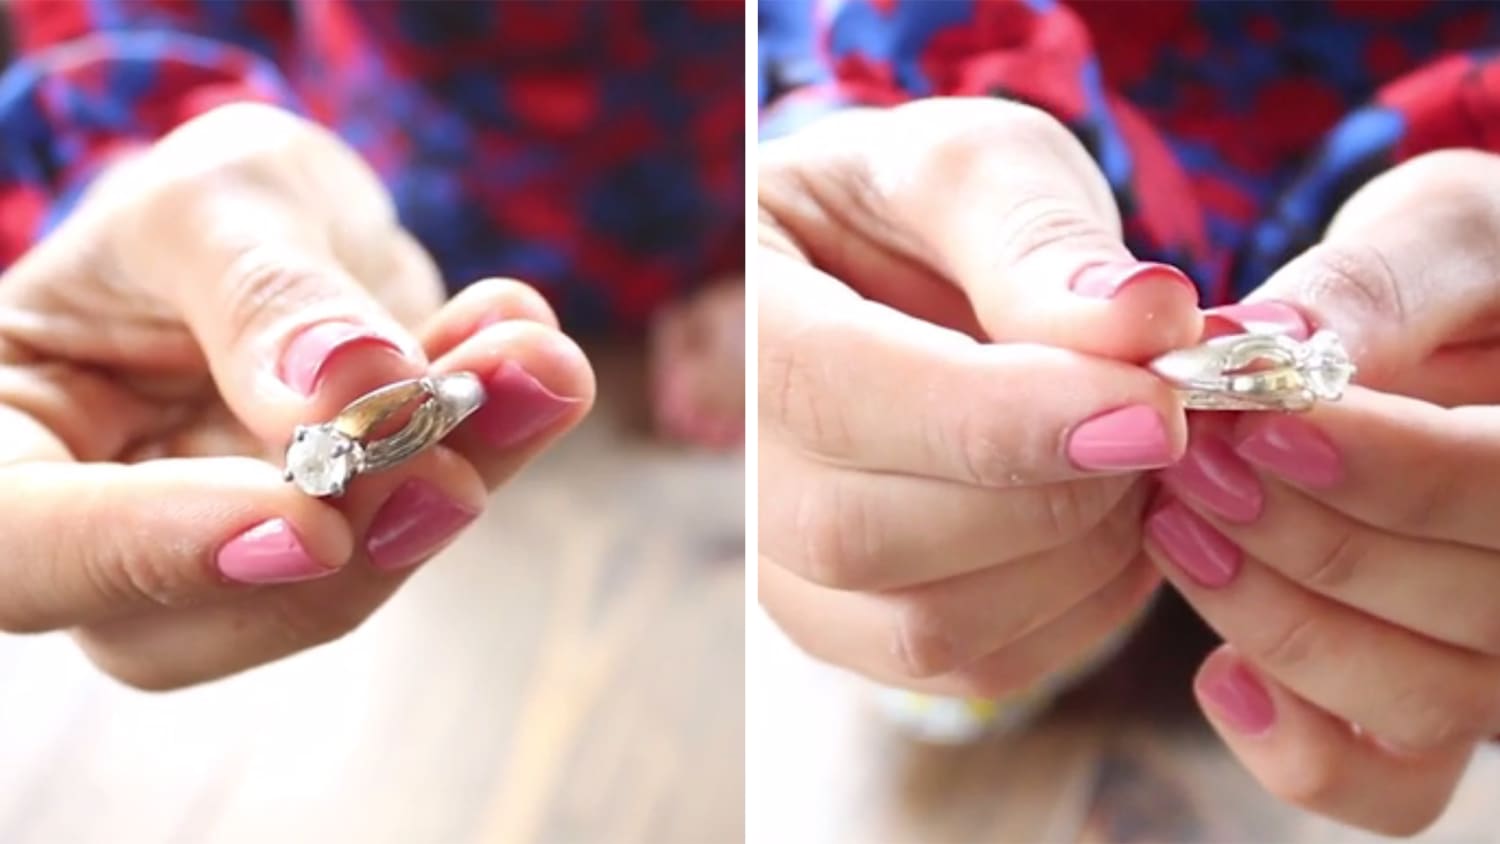 How to clean your diamond earrings at home in 5 easy steps